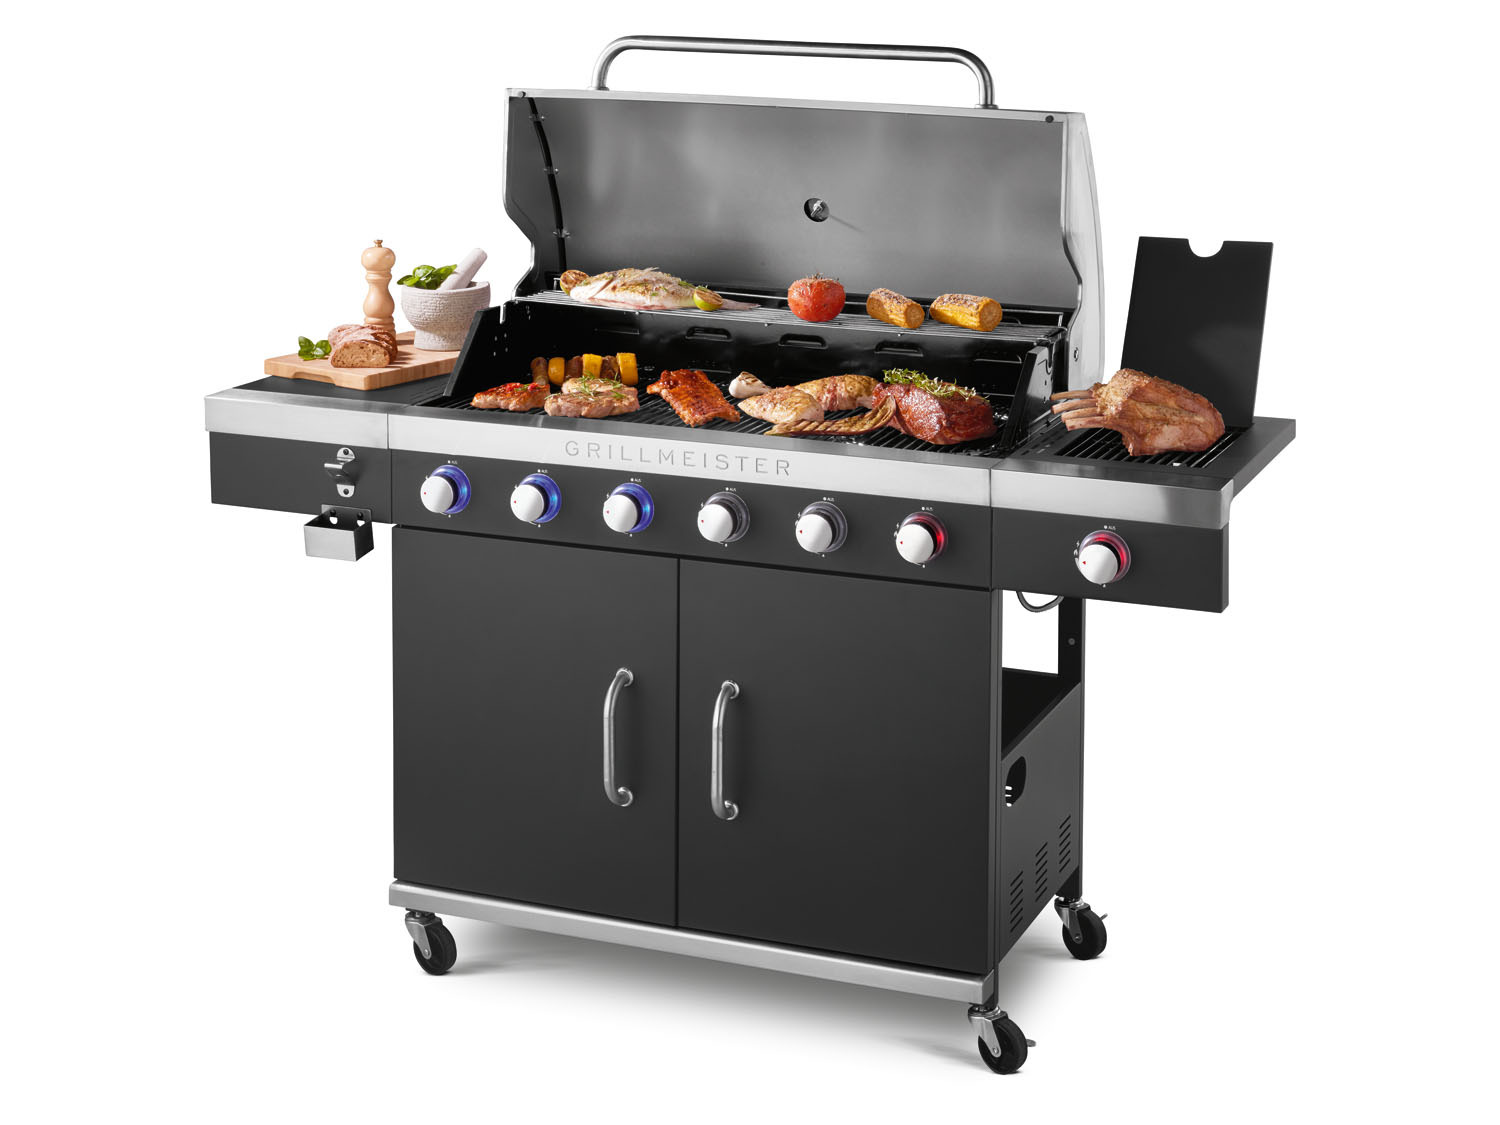 GRILLMEISTER 6plus1 | kW 26,1 LIDL Brenner, Gasgrill,